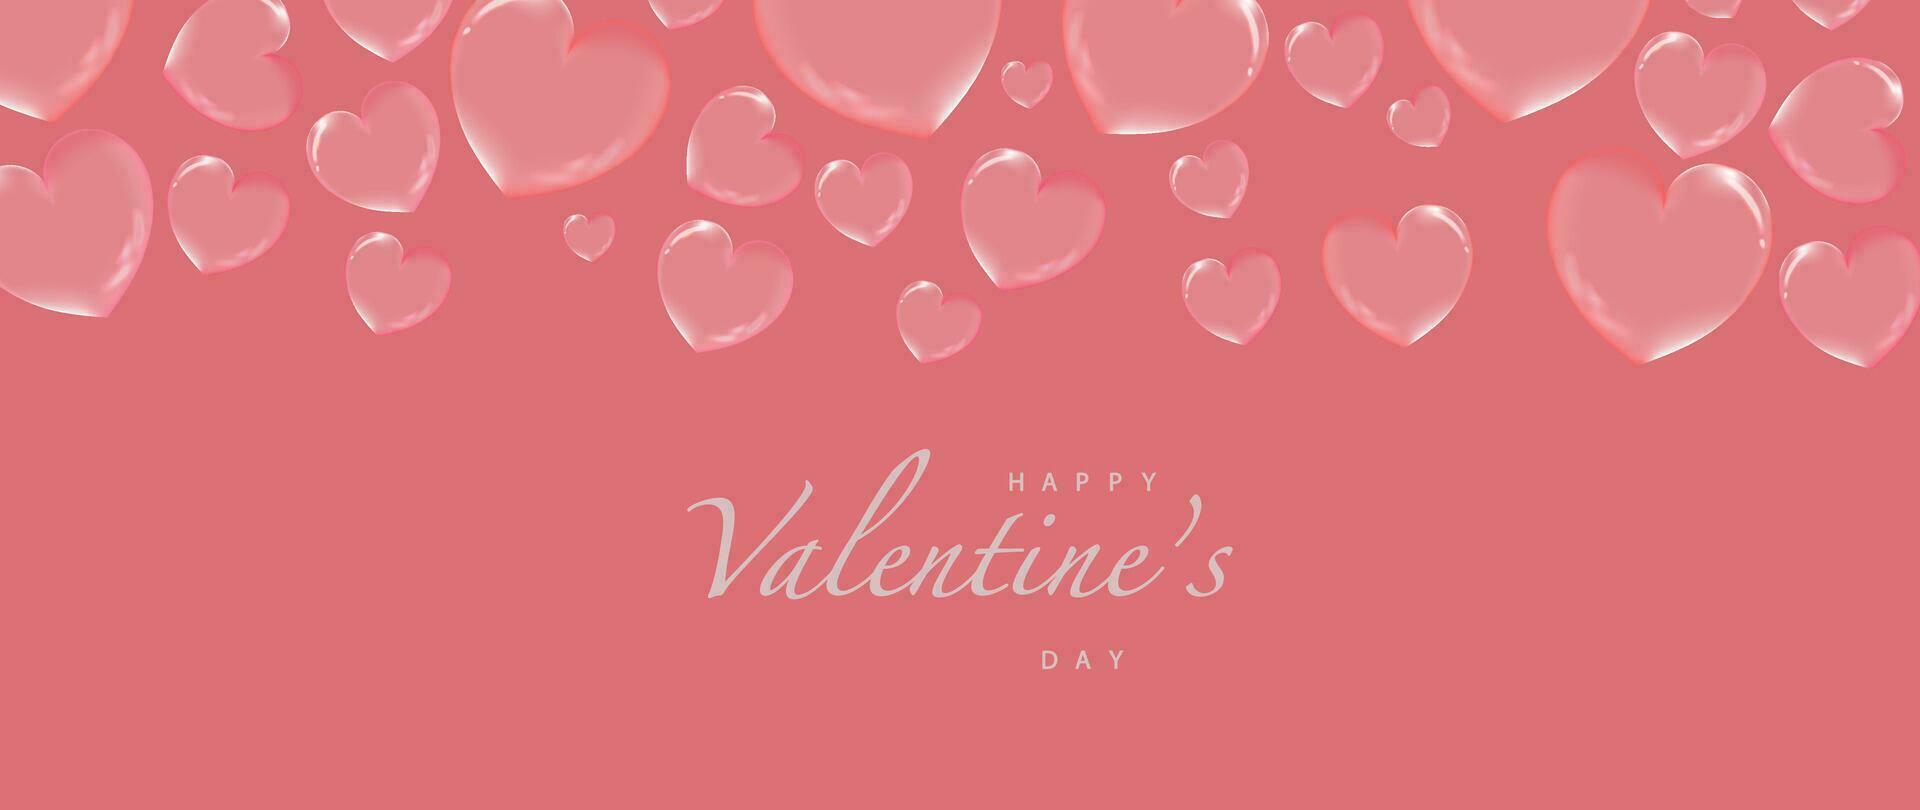 Happy Valentines day background vector. Romantic symbol wallpaper of 3d composition decorate with glossy blurred bubble hearts. Love illustration for greeting card, web banner, package, cover. vector